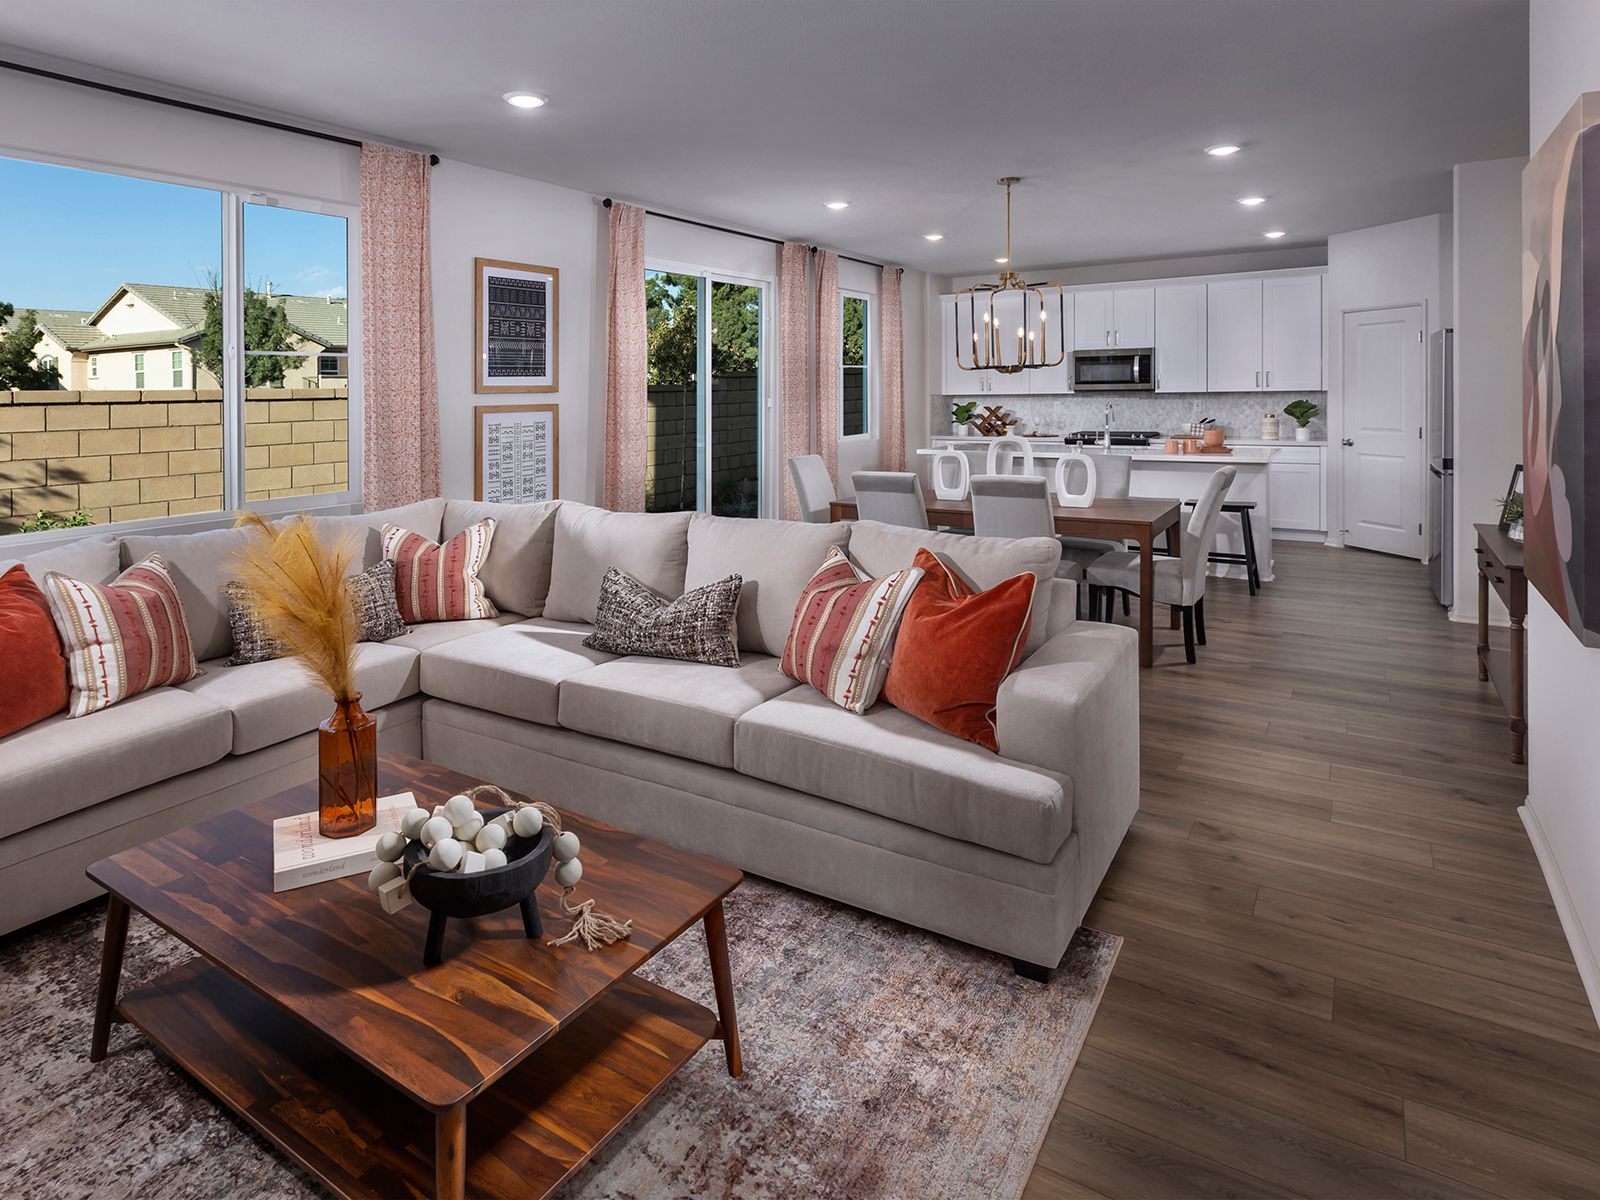 Stay connected as a family in the open-concept living spaces.